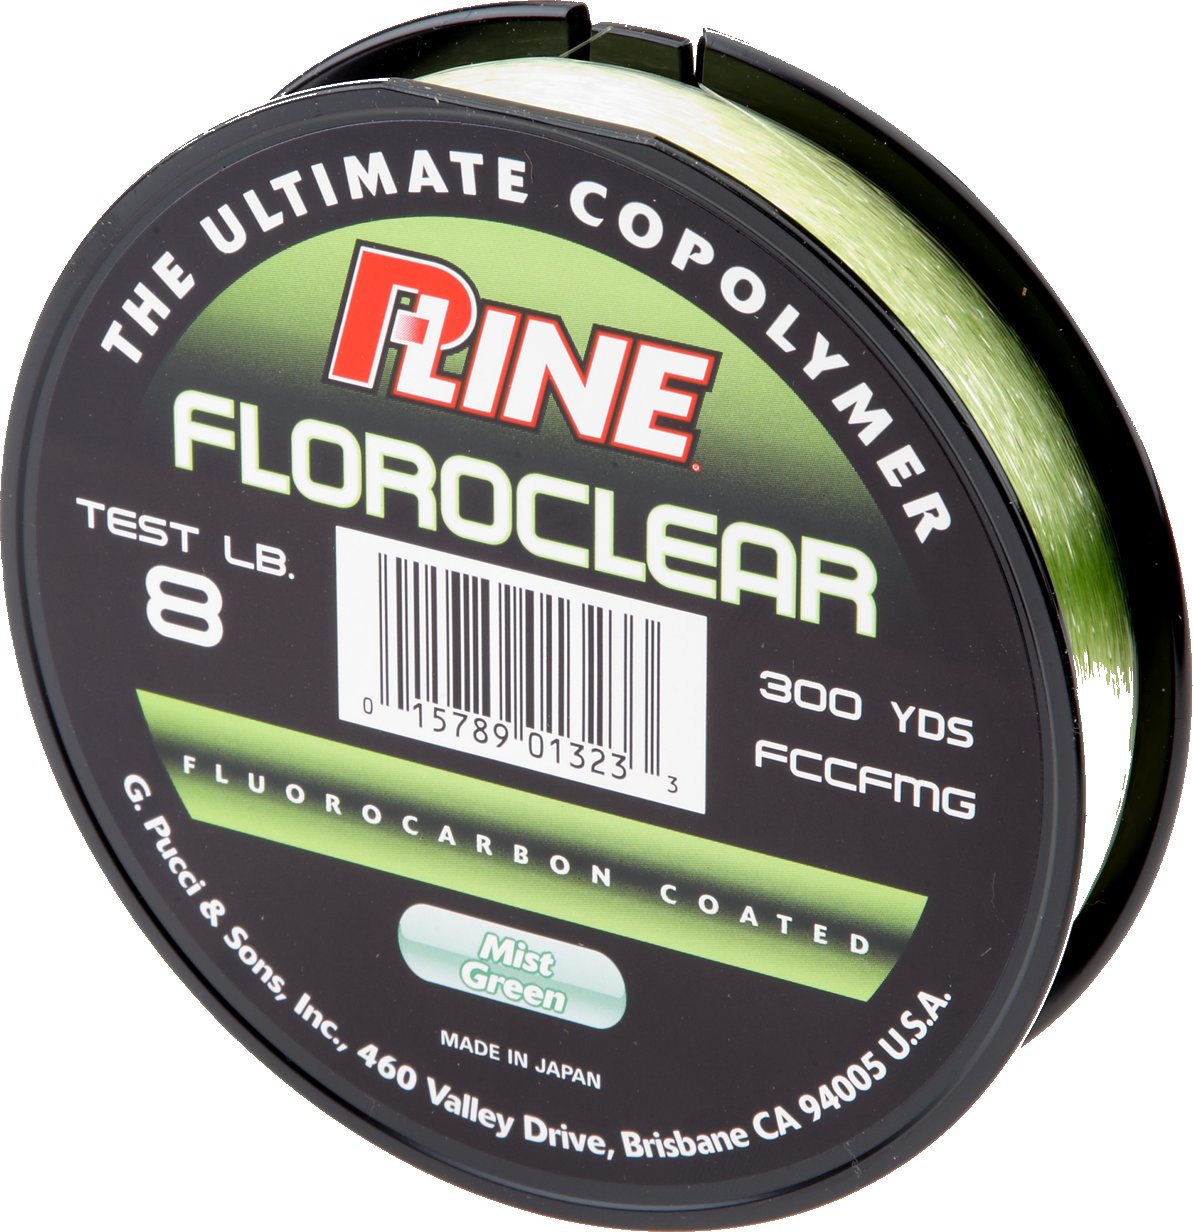 P-Line Floroclear Fluorocarbon Coated Line 300 Yards